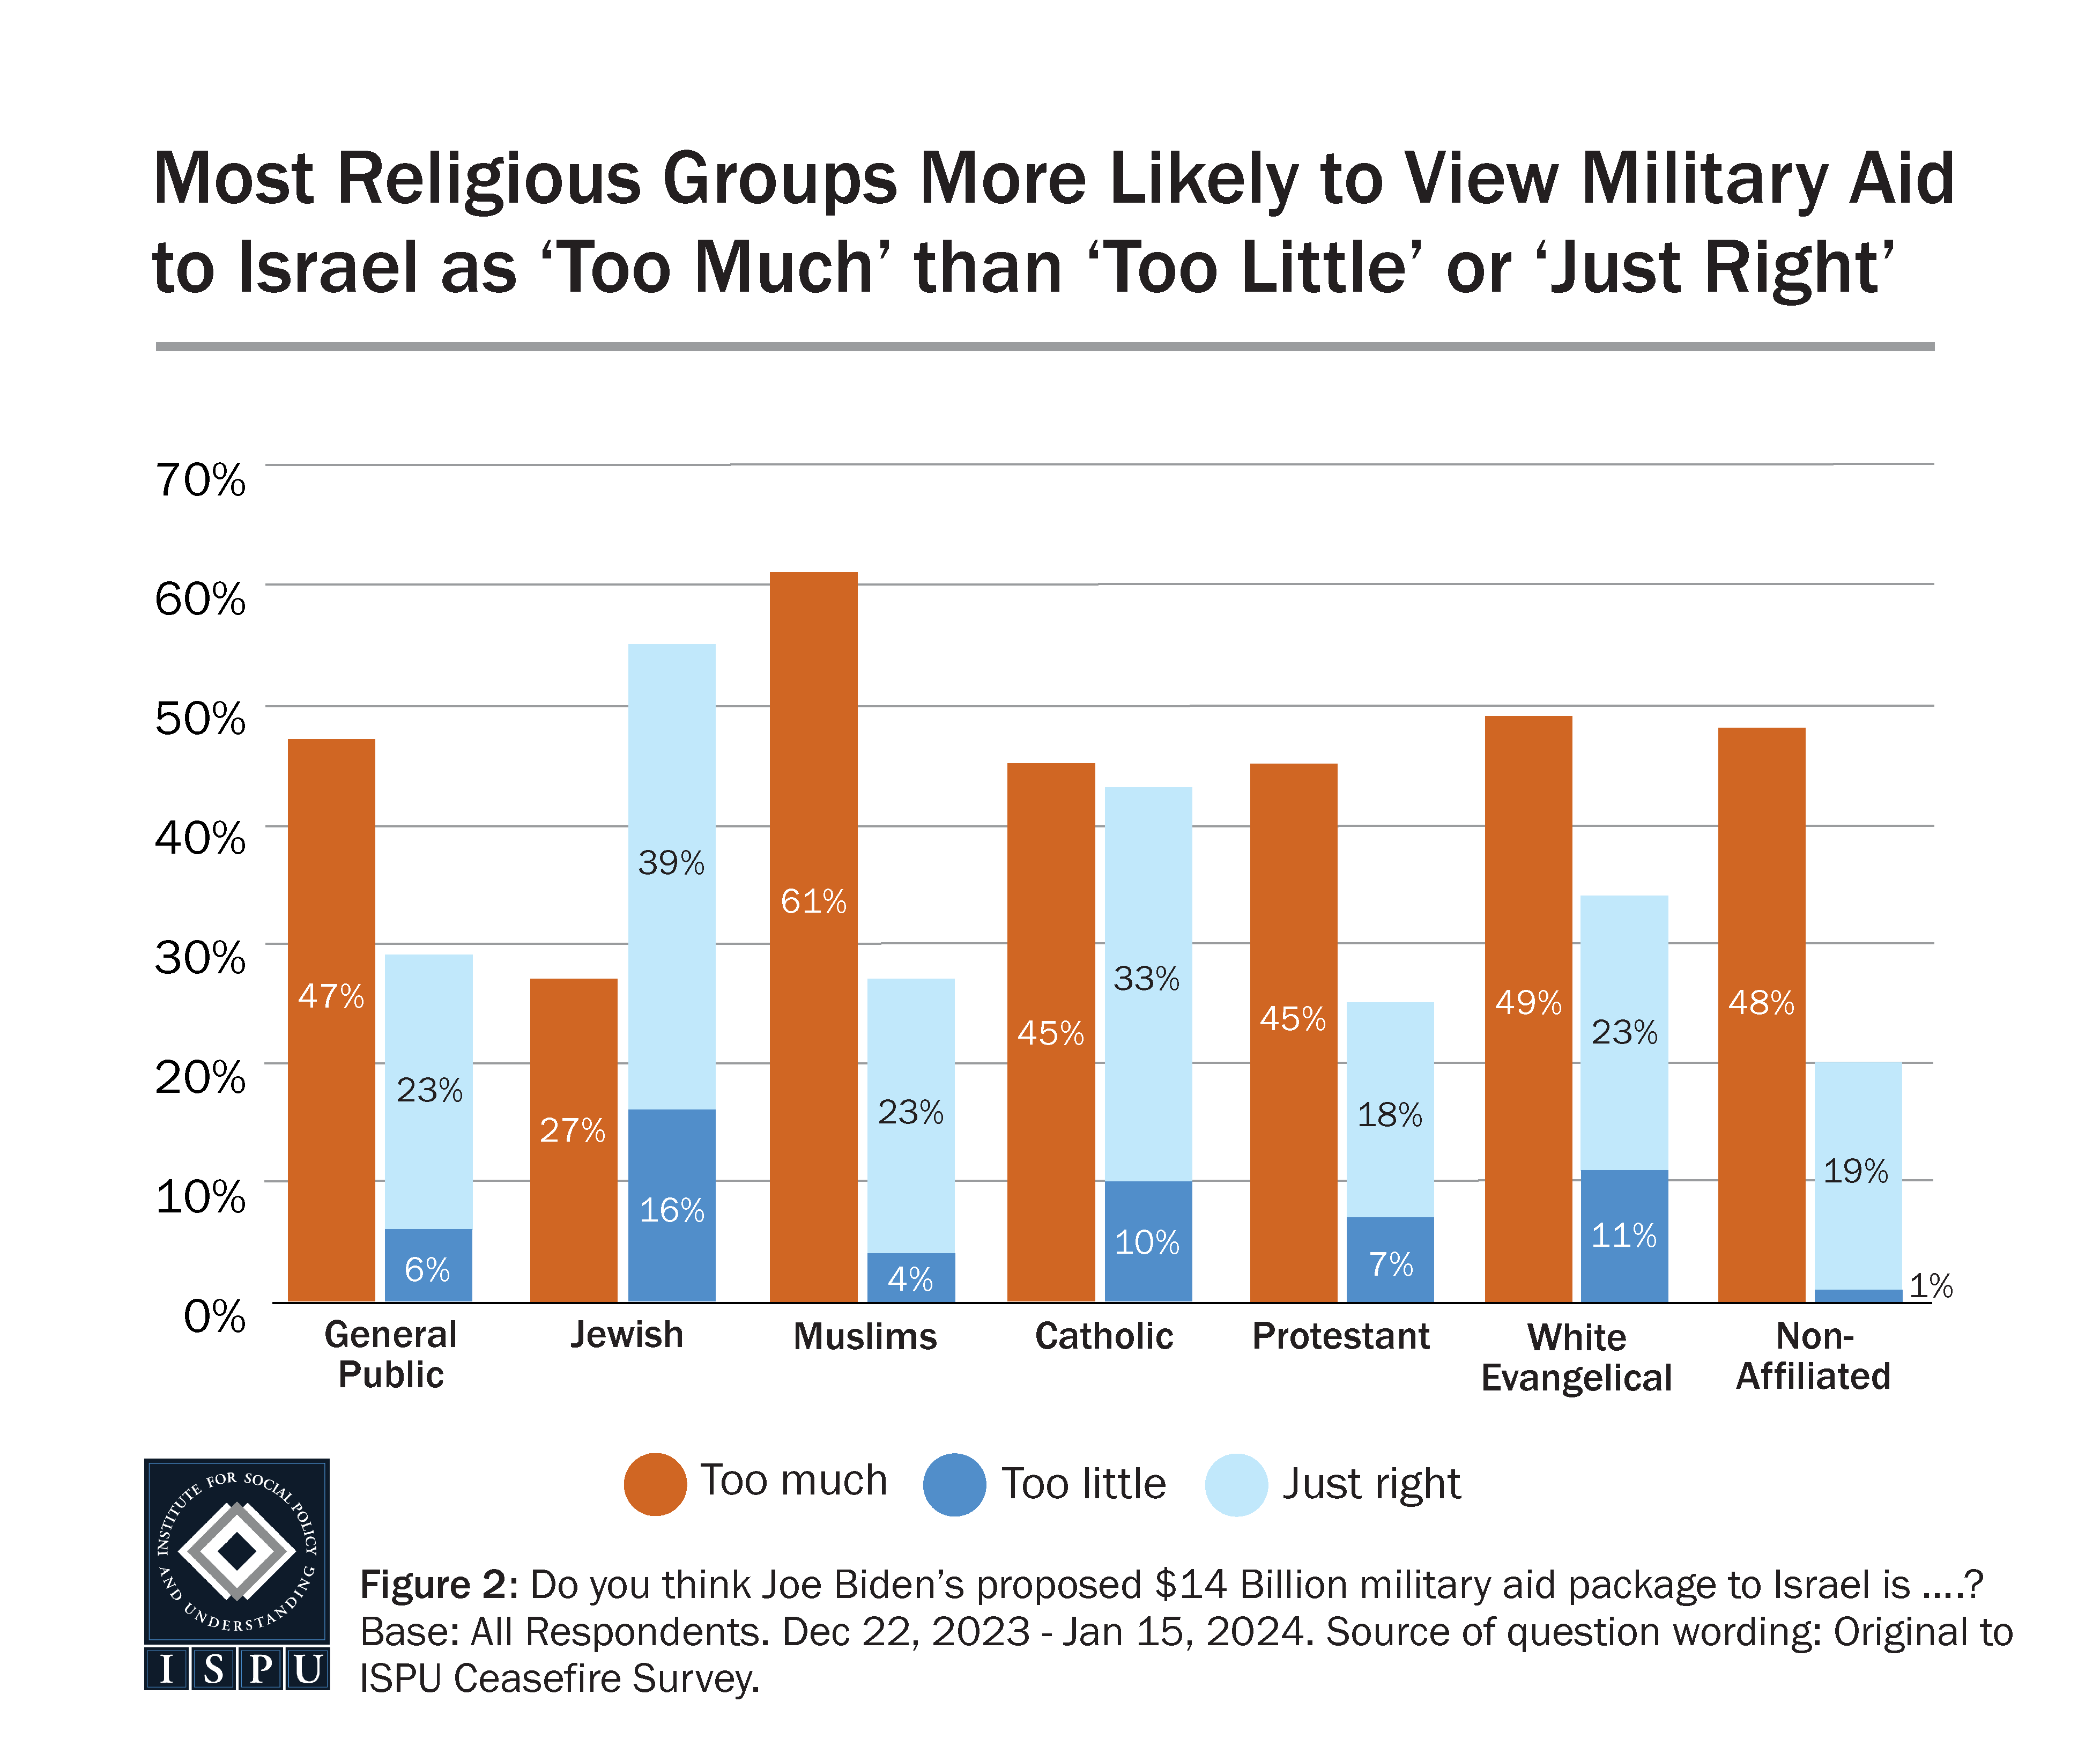 A bar graph showing views on US military aid packages to Israel by religious groups and the general public.